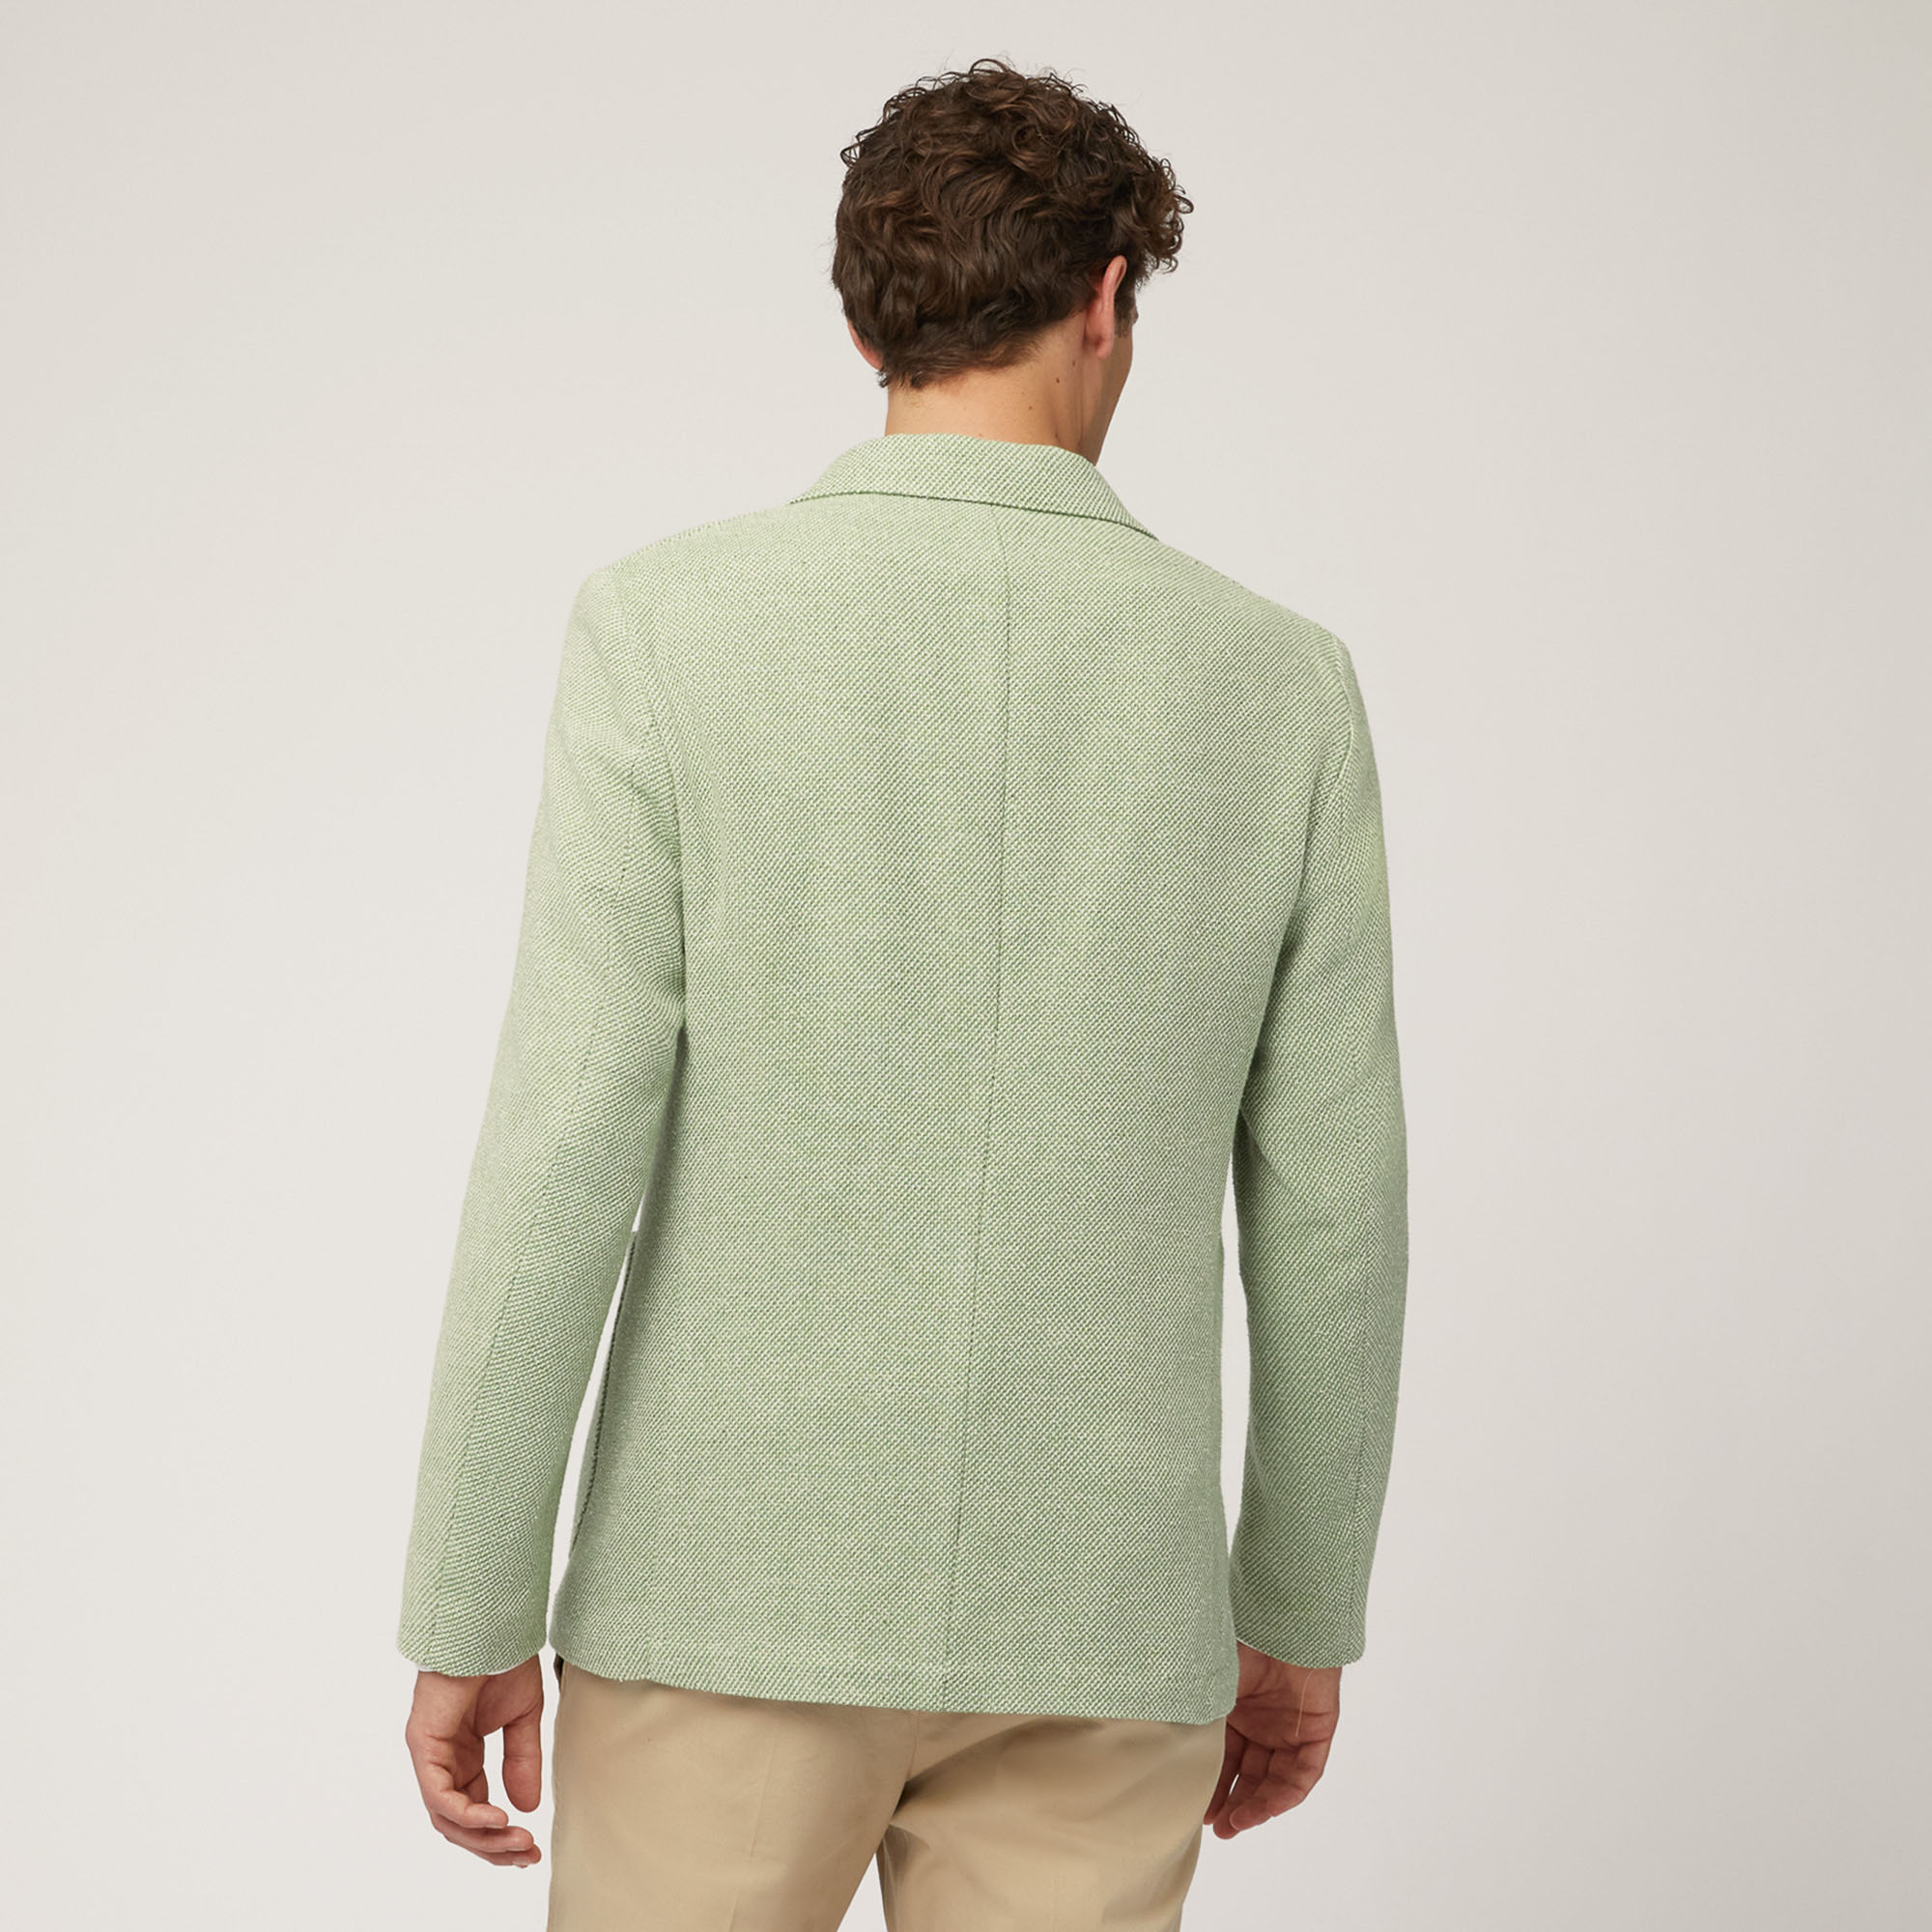 Cotton and Linen Jacket with Pockets and Breast Pocket, Herb, large image number 1